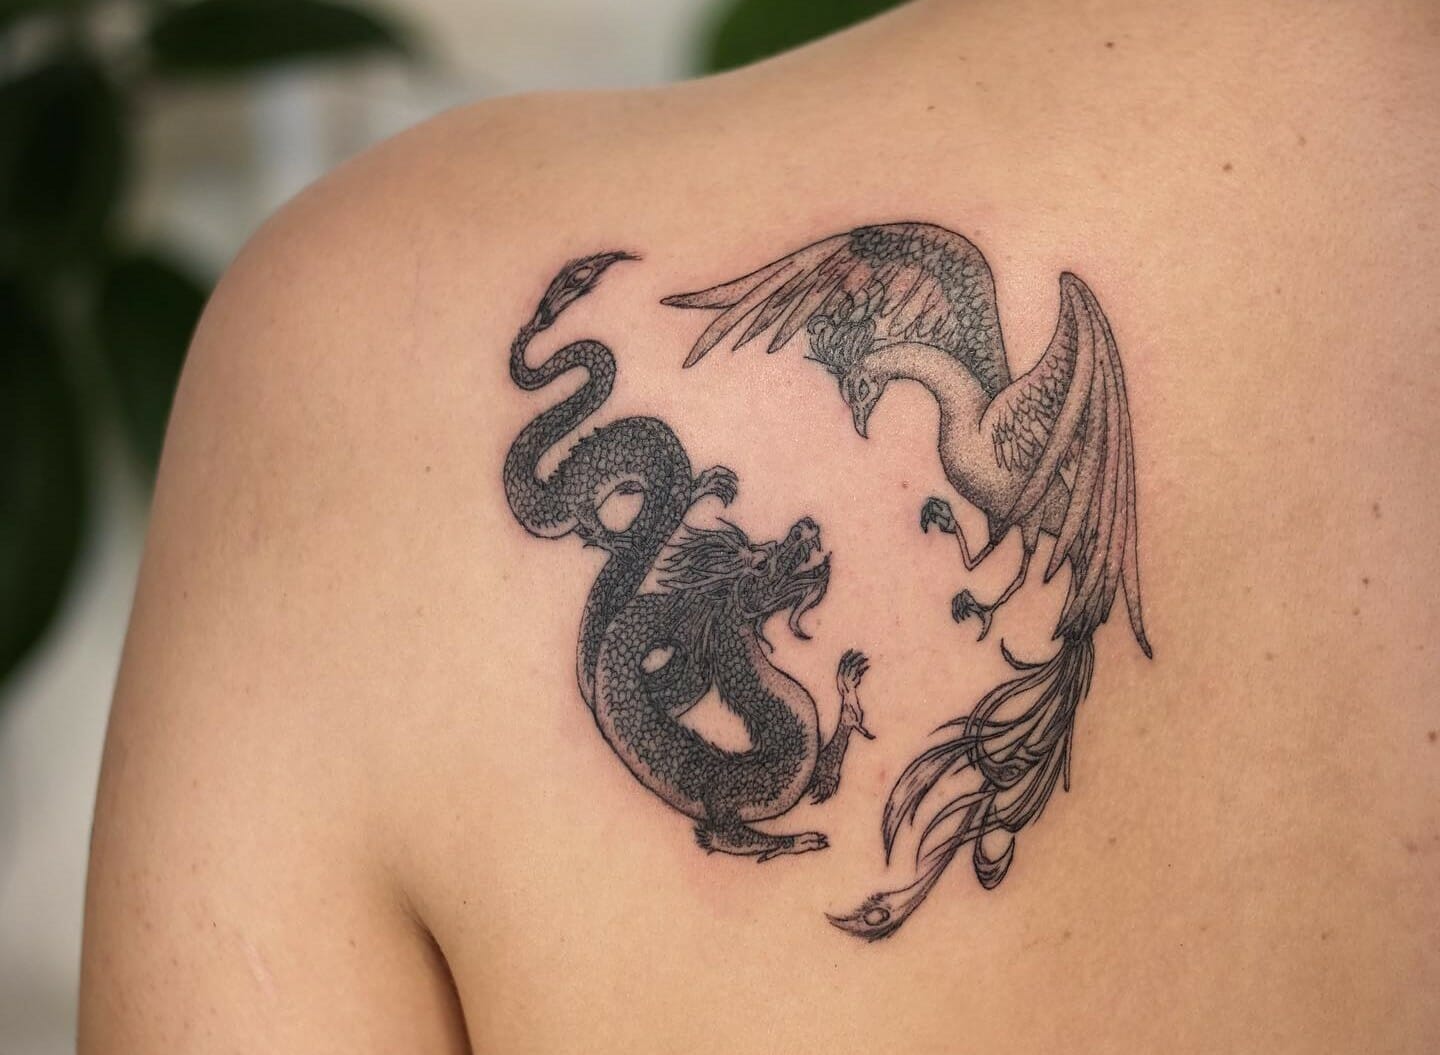 101 Best Dragon and Phoenix Tattoo Ideas That Will Blow Your Mind! - Outsons